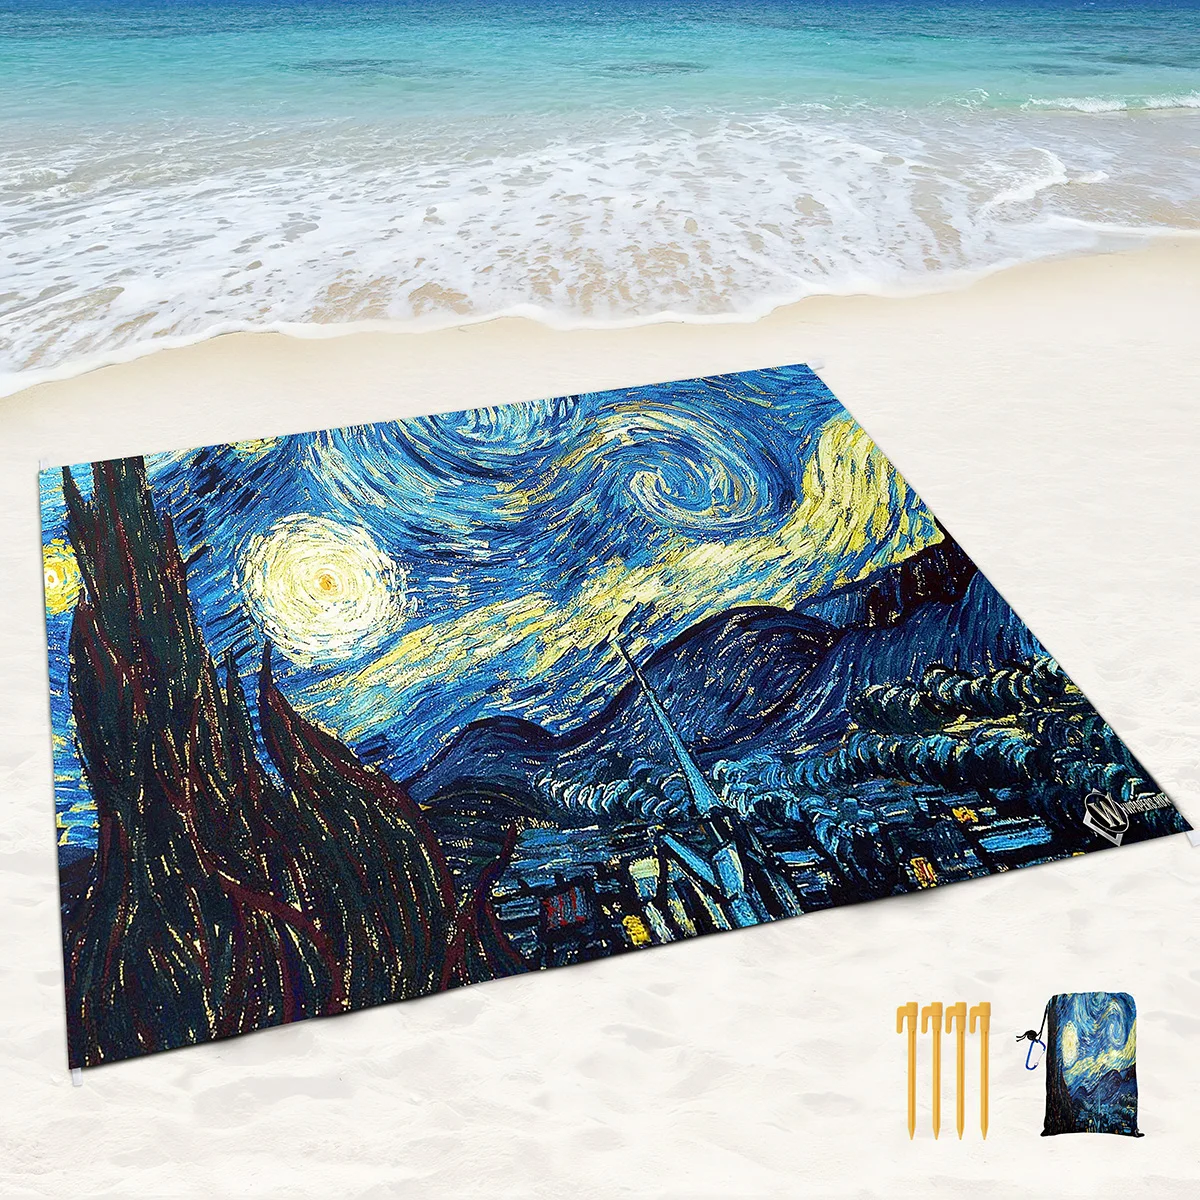 

Van Gogh Oil Painting Large Sand Poof Beach Blanket with Corner Pockets and Mesh Bag for Beach Party,Travel,Camping,Light Weight